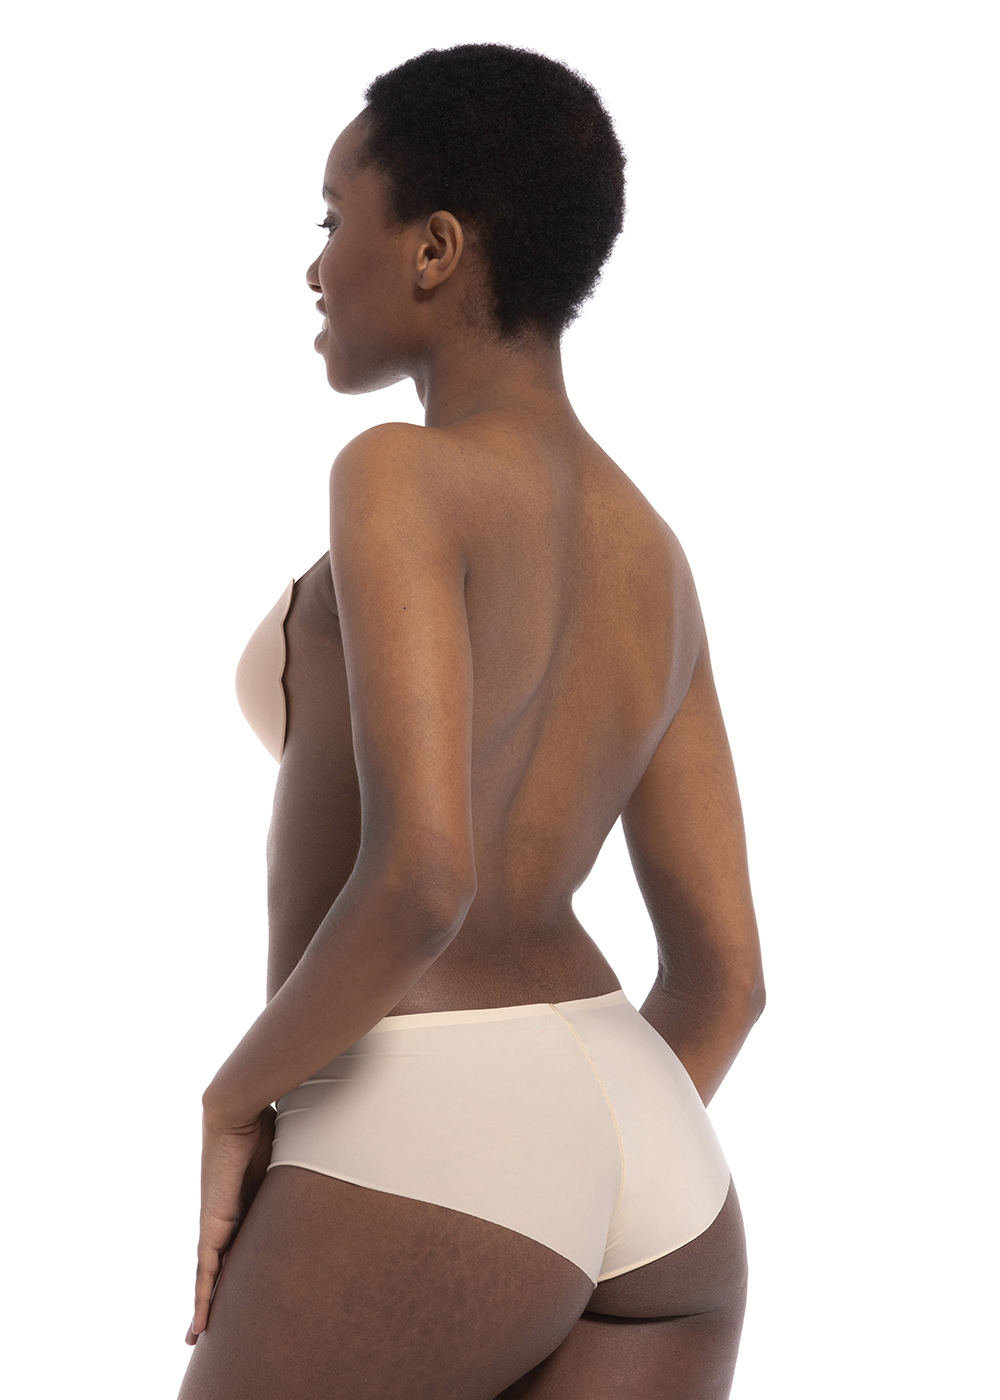 Undergarments for low back dress. There are already built in cups